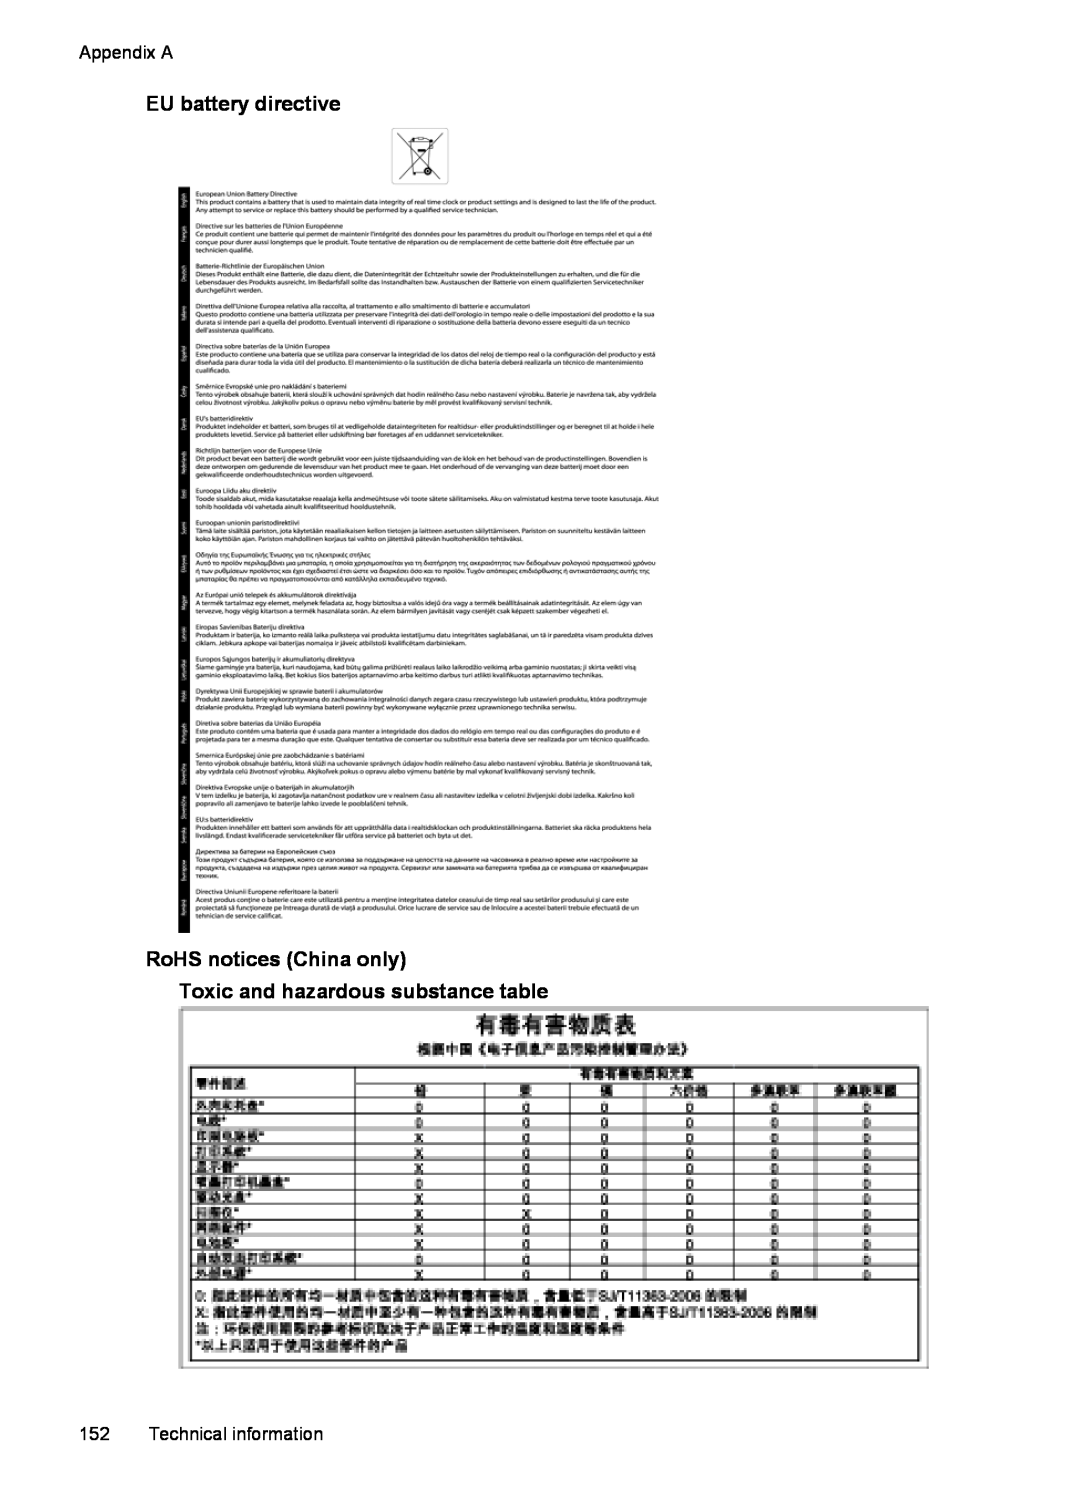 HP 6600 - H7 manual EU battery directive RoHS notices China only, Toxic and hazardous substance table, Appendix A 